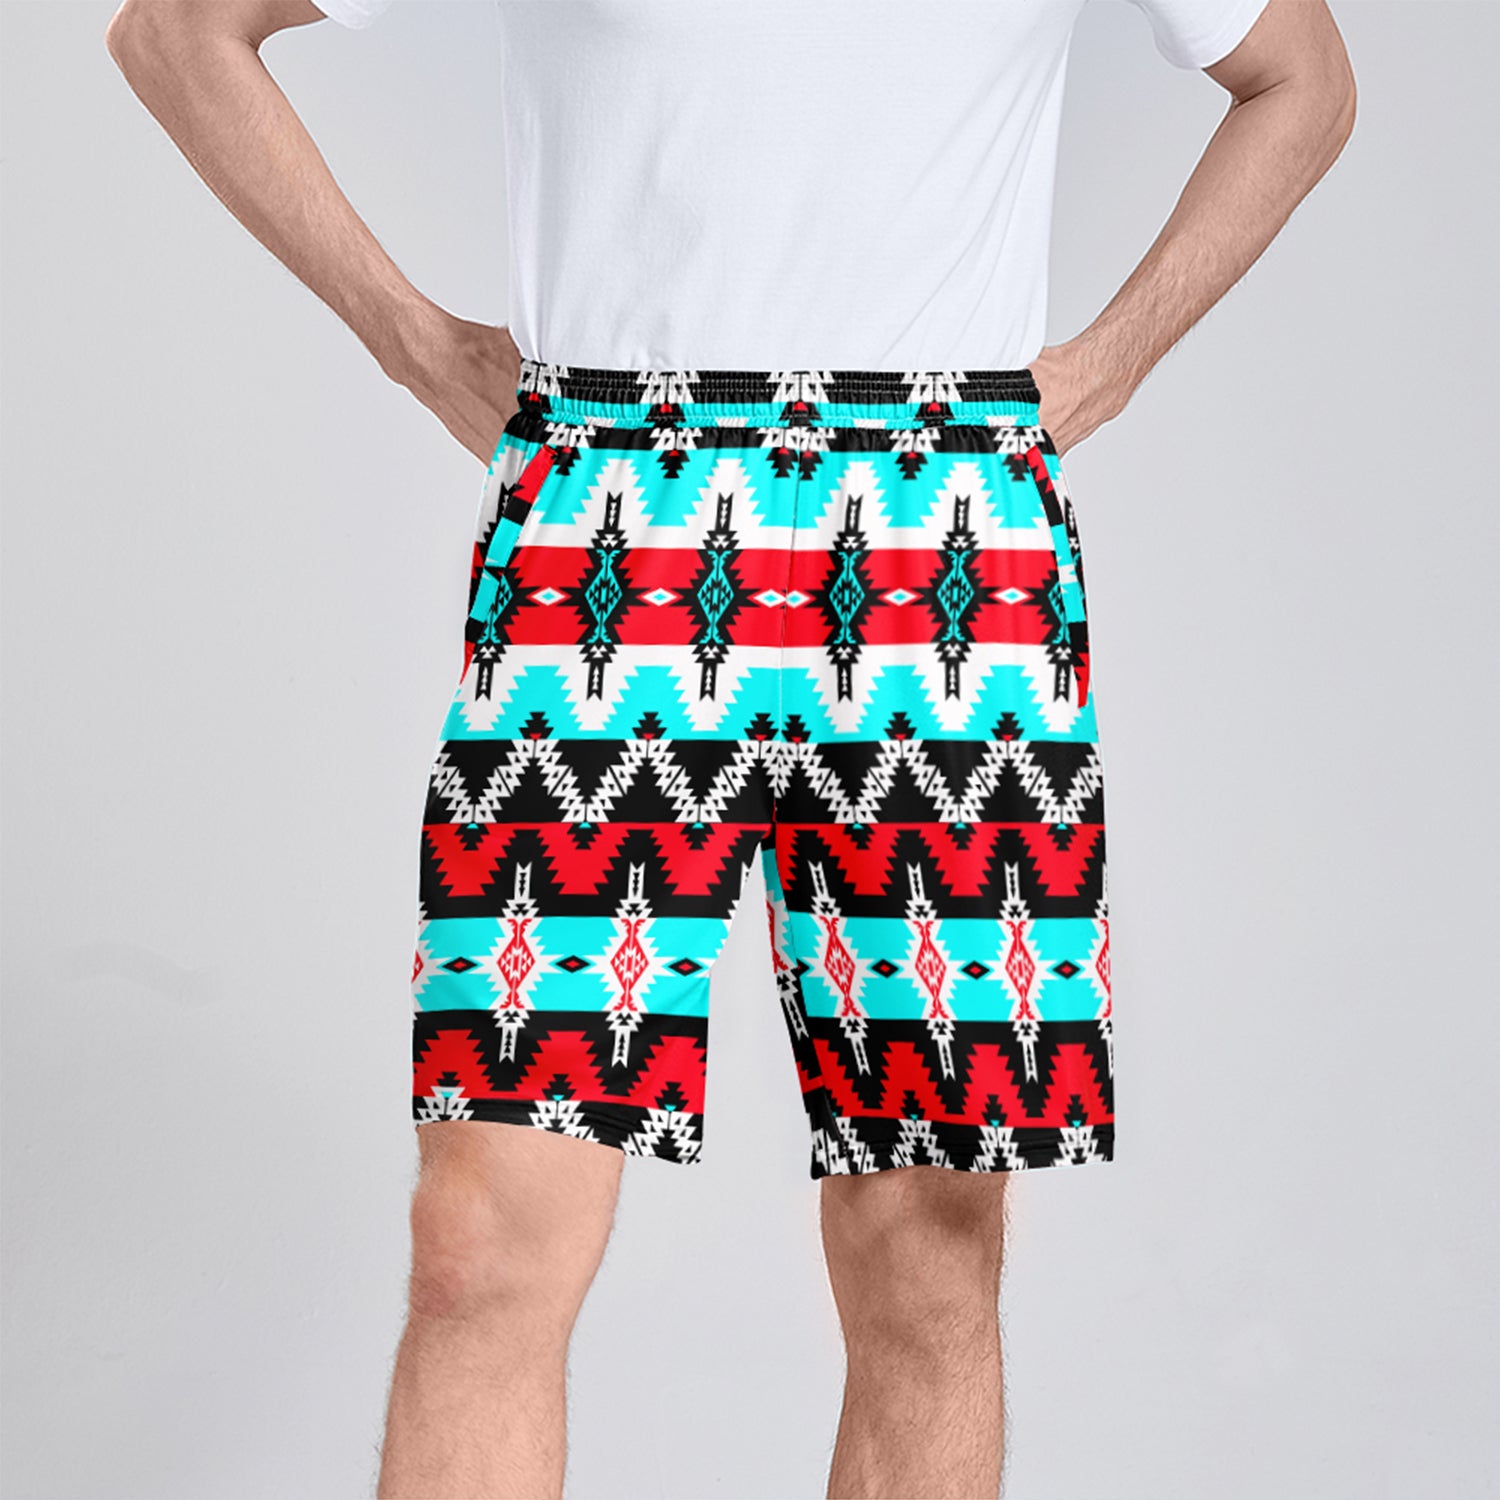 Two Spirit Dance Athletic Shorts with Pockets